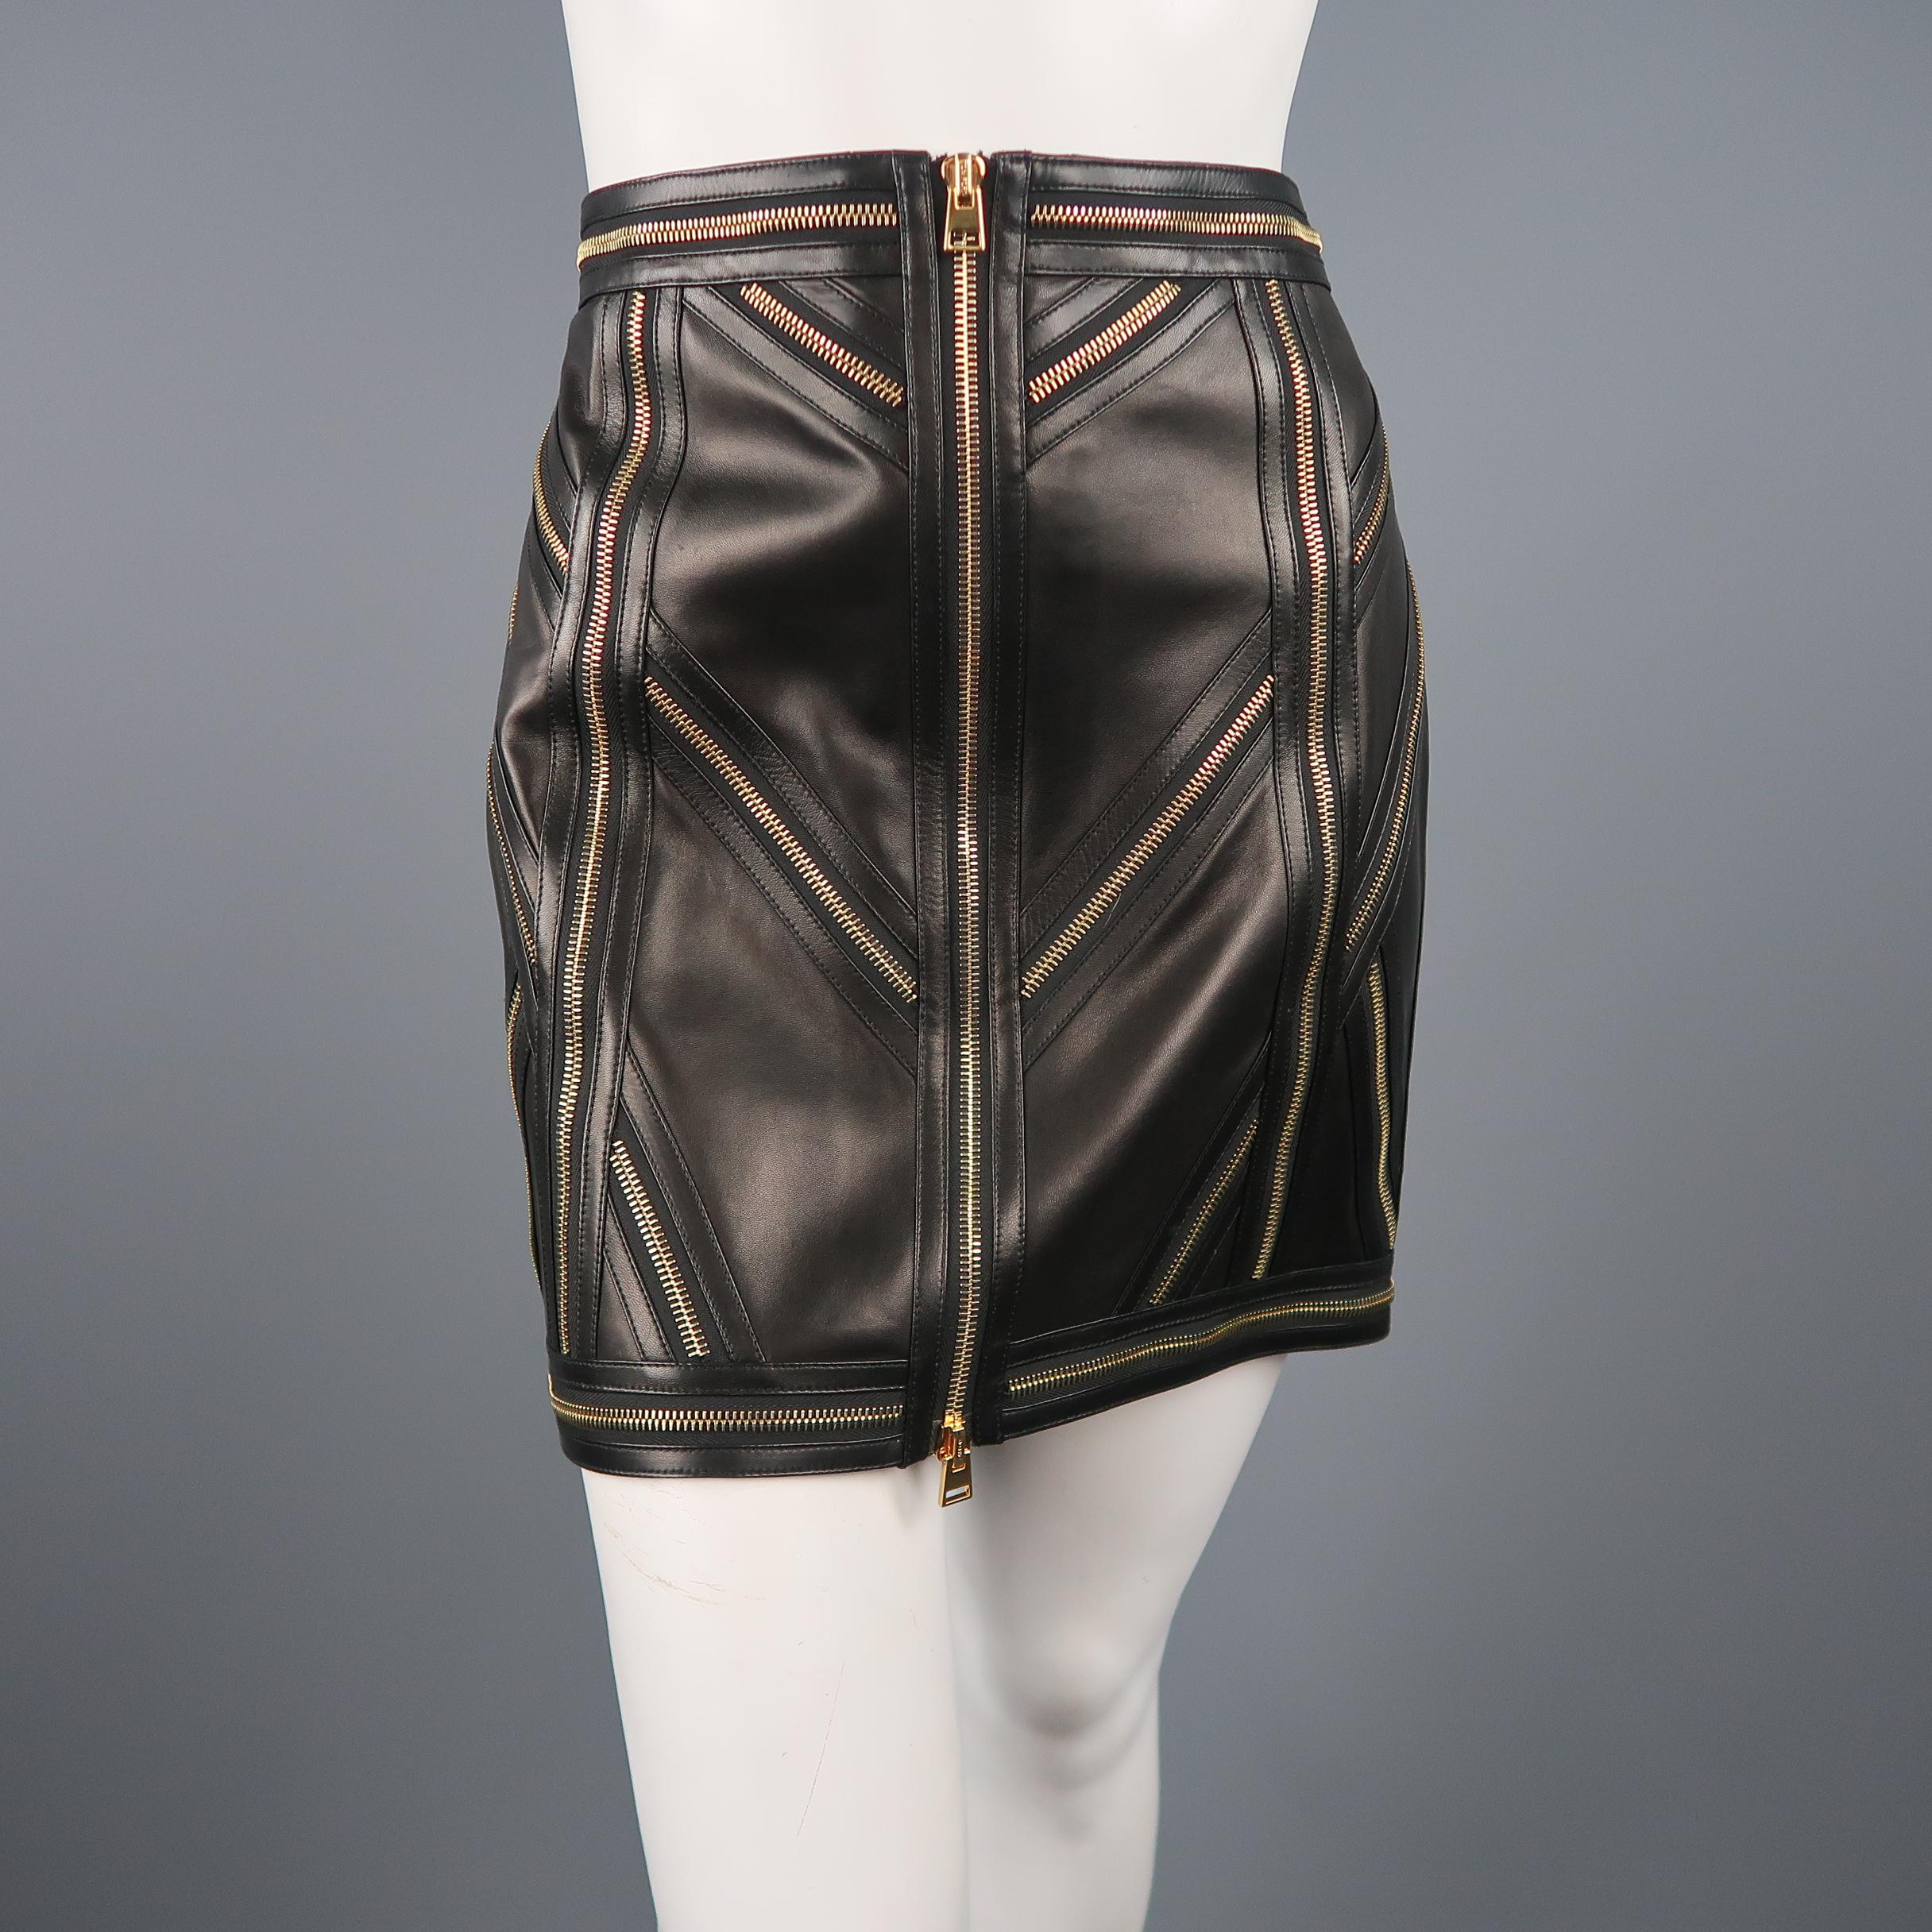 TOM FORD mini skirt comes in smooth black leather with a gold tone double zip frontal closure and directional patchwork zip panel pattern throughout. Made in Italy.
 
Excellent Pre-Owned Condition.
Marked: IT 42
 
Measurements:
 
Waist: 31 in.
Hip: